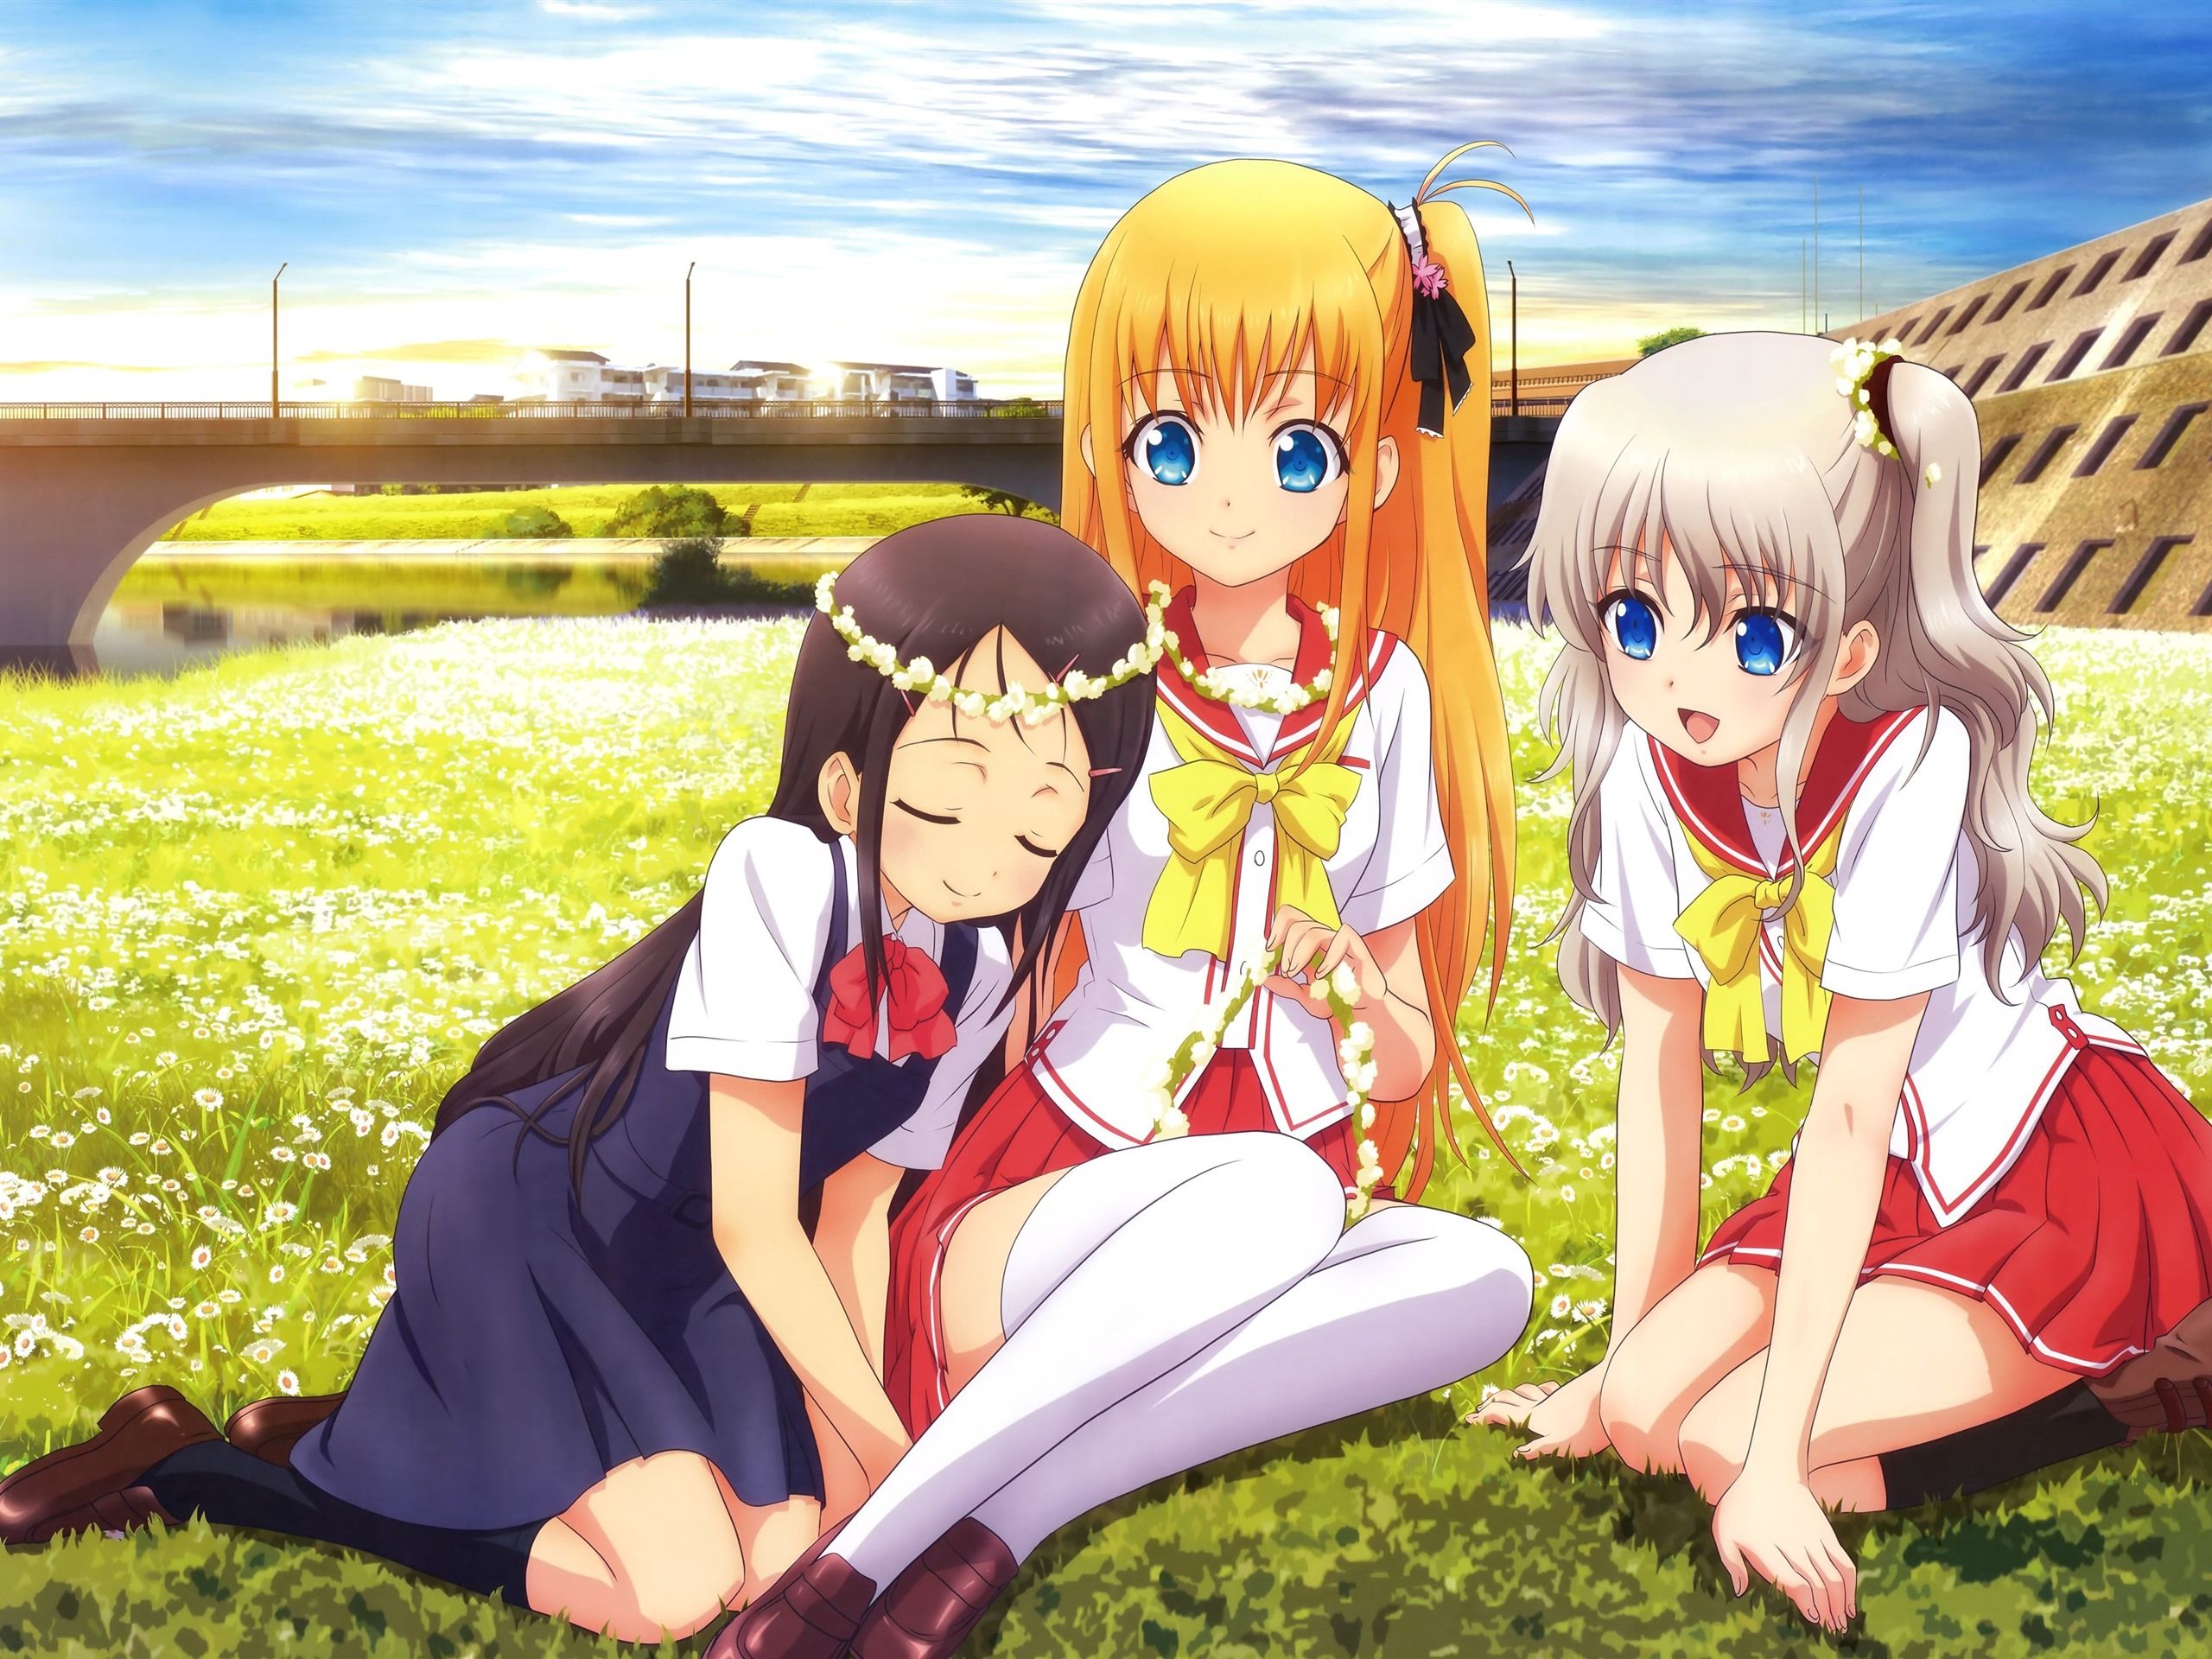 Wallpaper Three anime girls, friends, meadow 3840x2160 UHD 4K Picture, Image